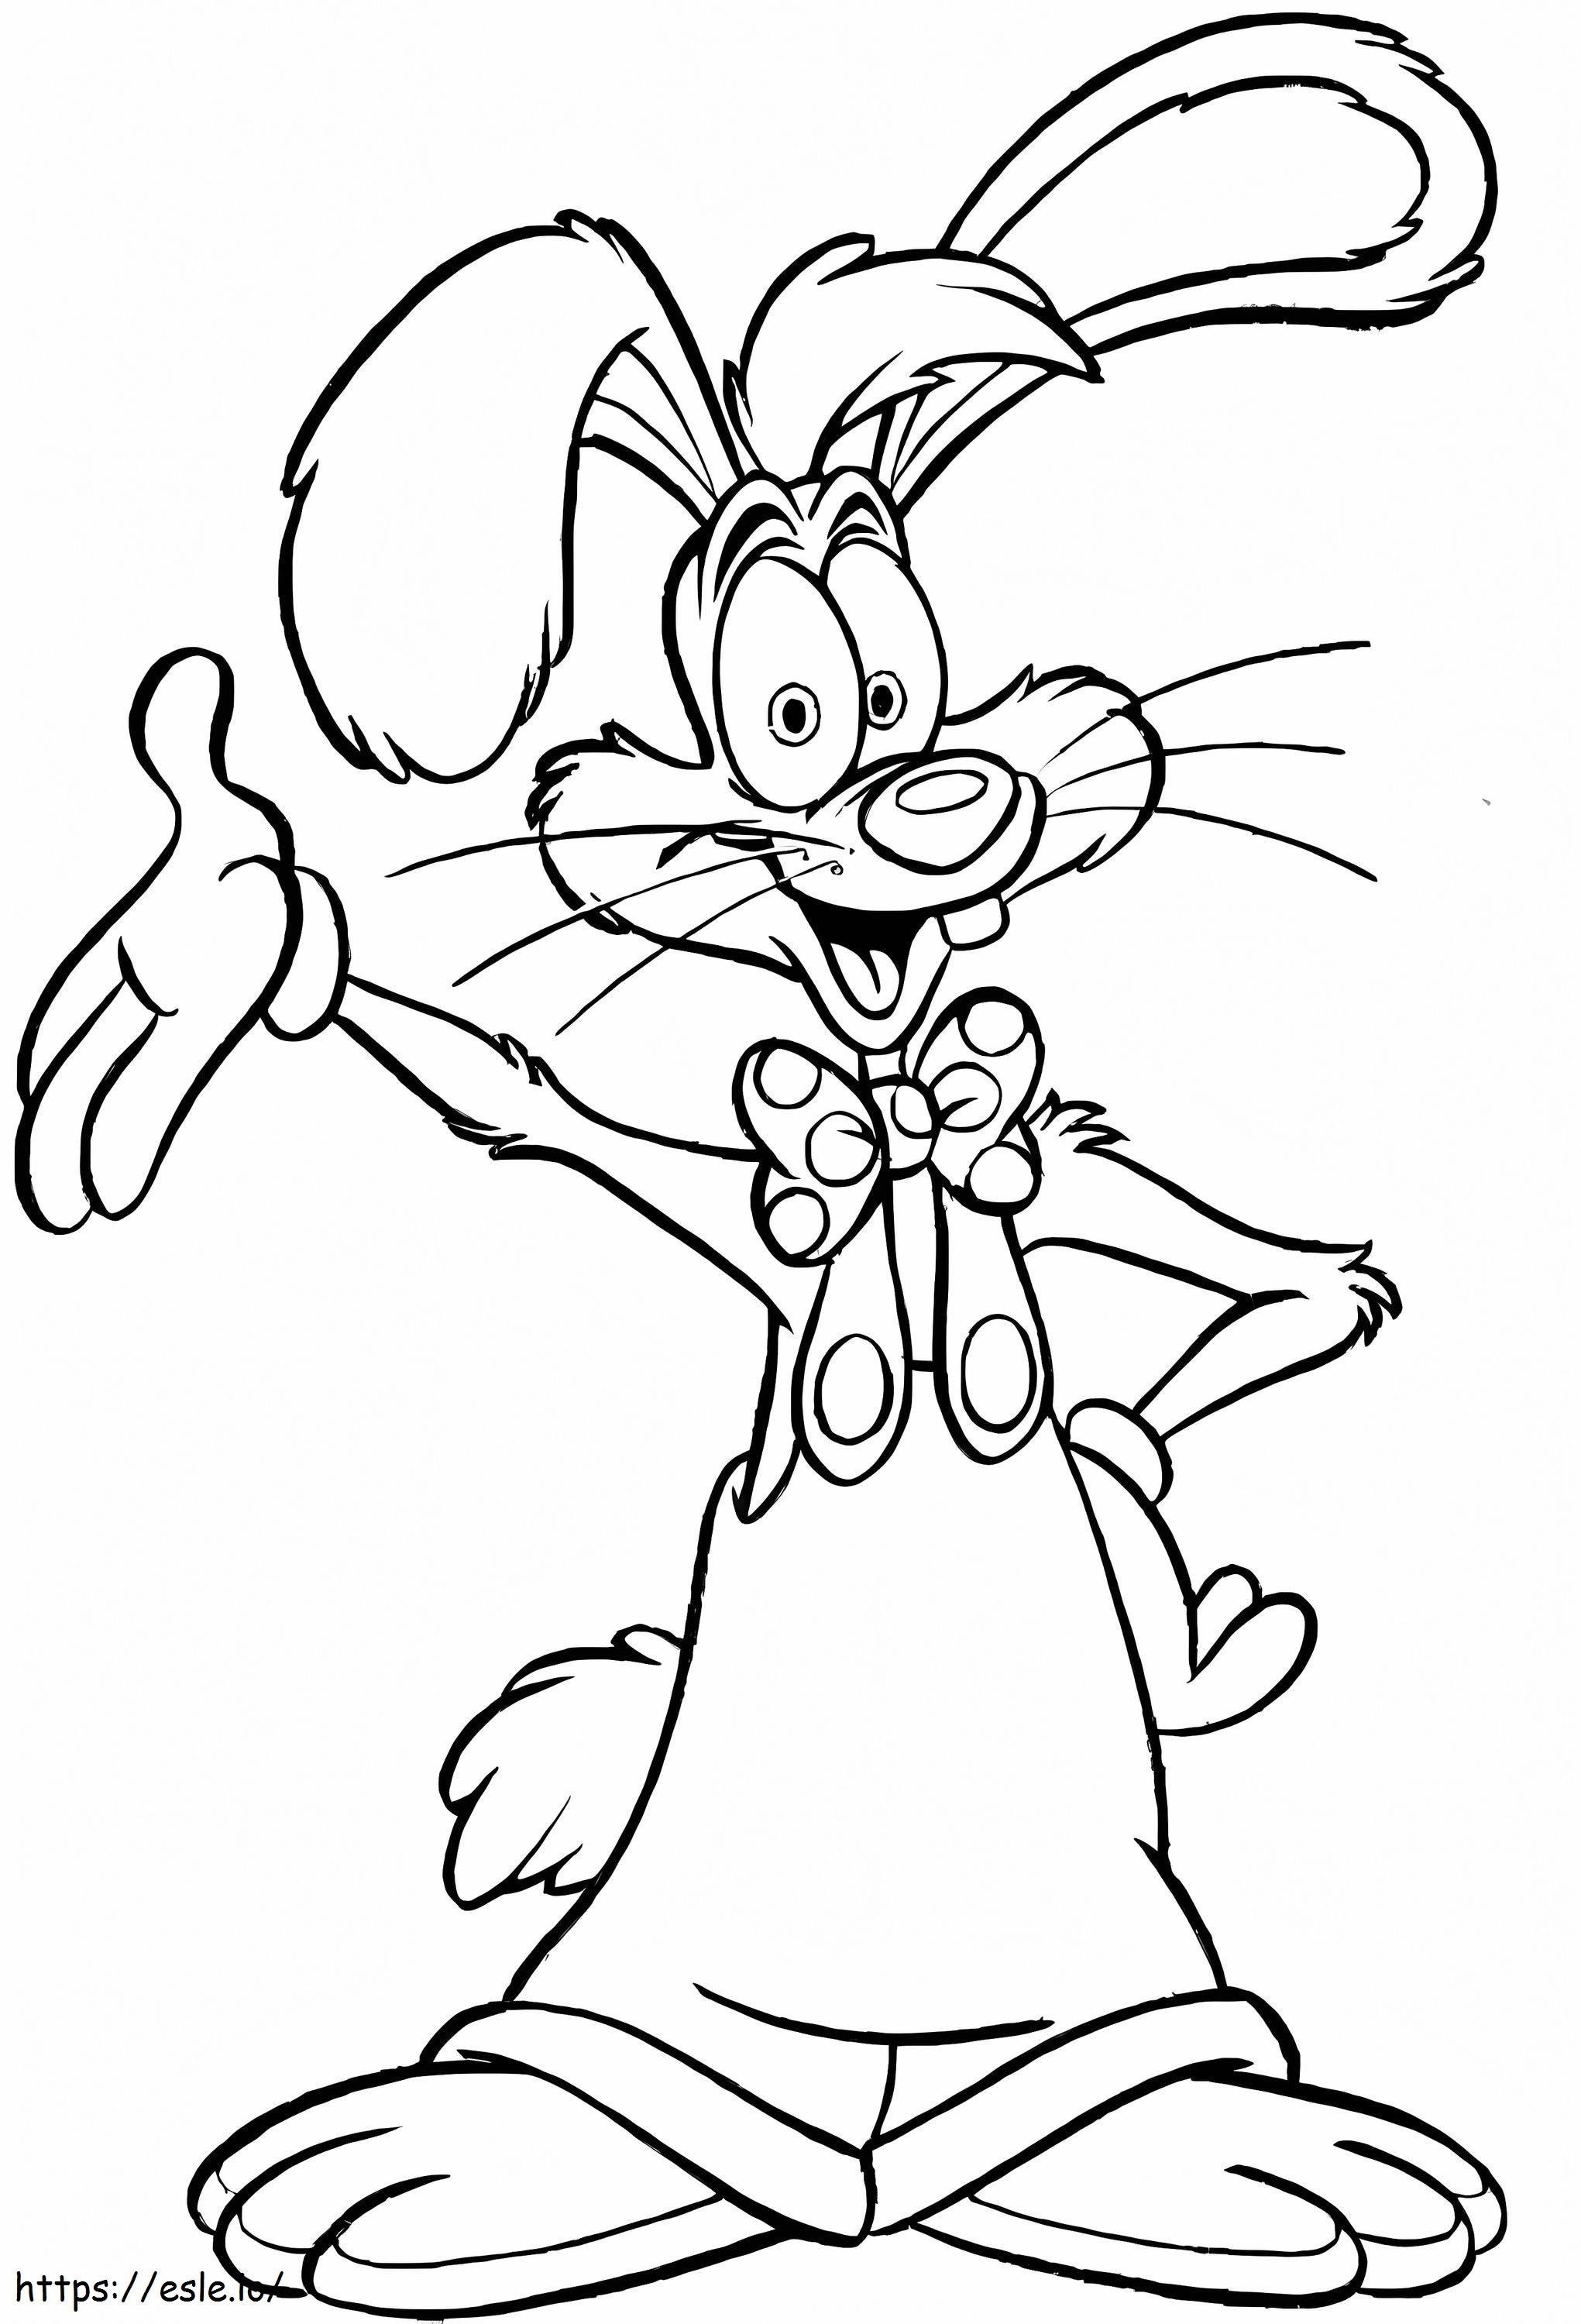 Happy Roger Rabbit coloring page